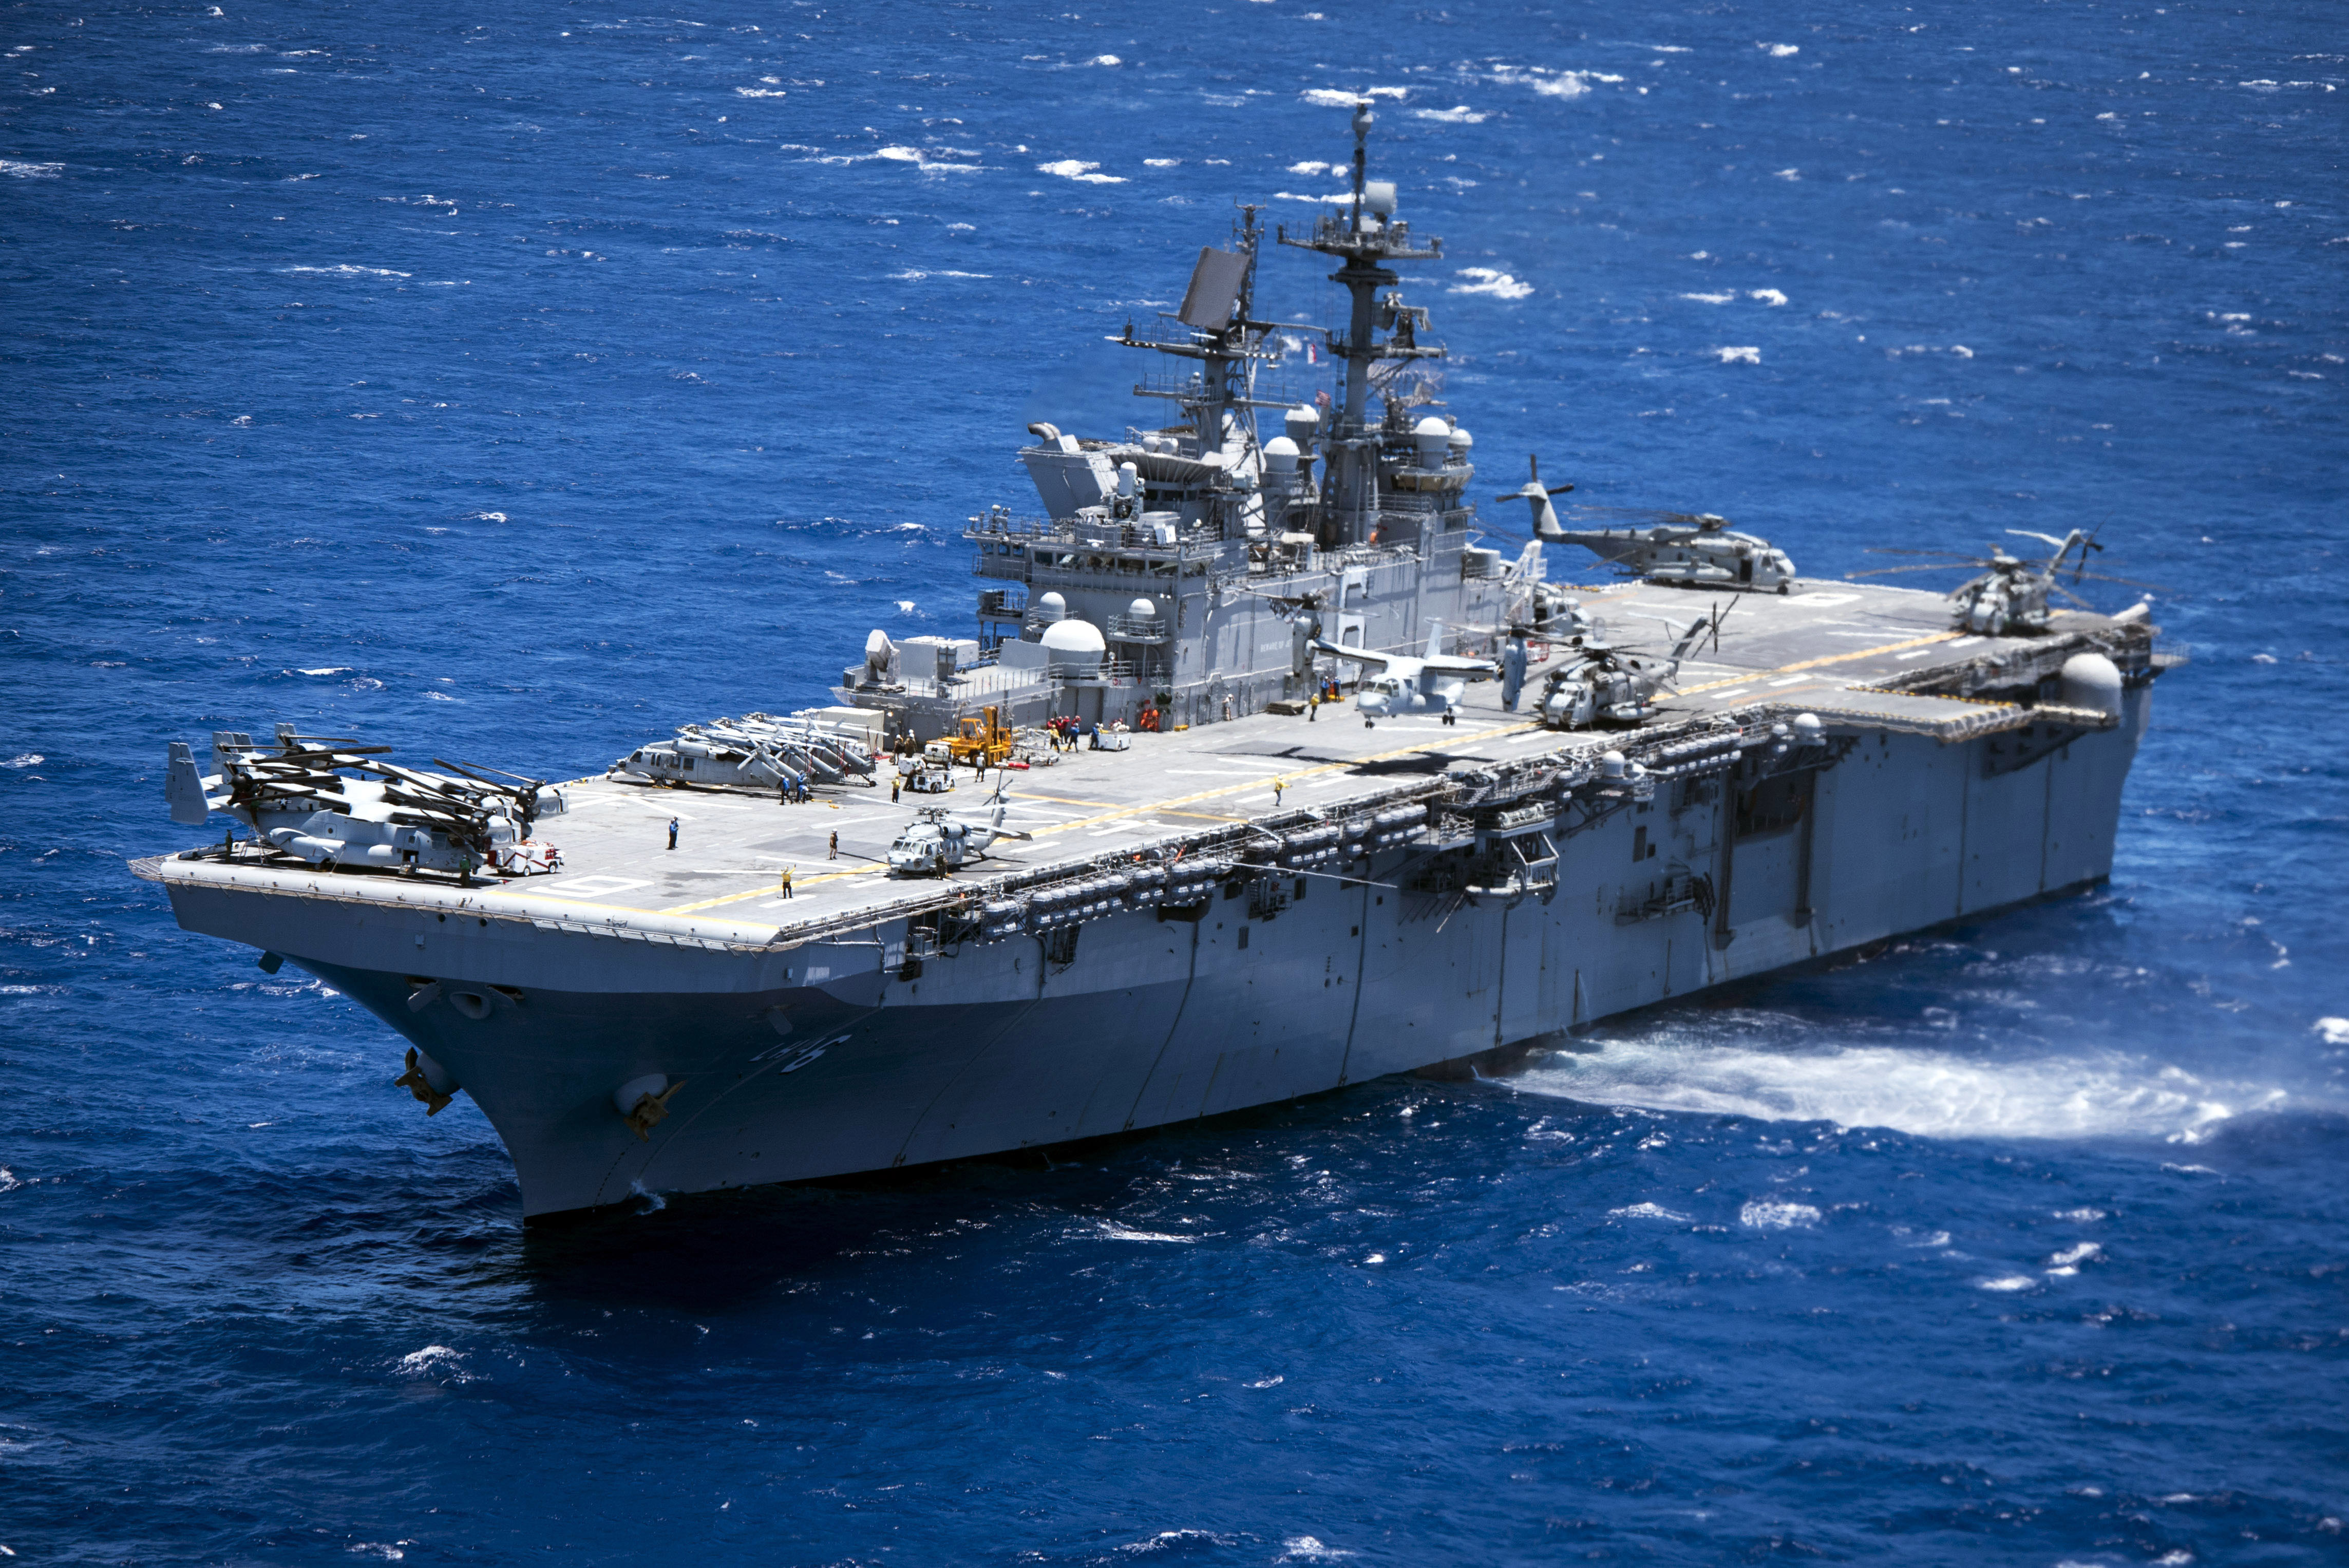 USS America (LHA 6) underway in the waters near the Hawaiian Islands as part of Rim of the Pacific (RIMPAC) 2016 on July 15, 2016. US Navy Photo